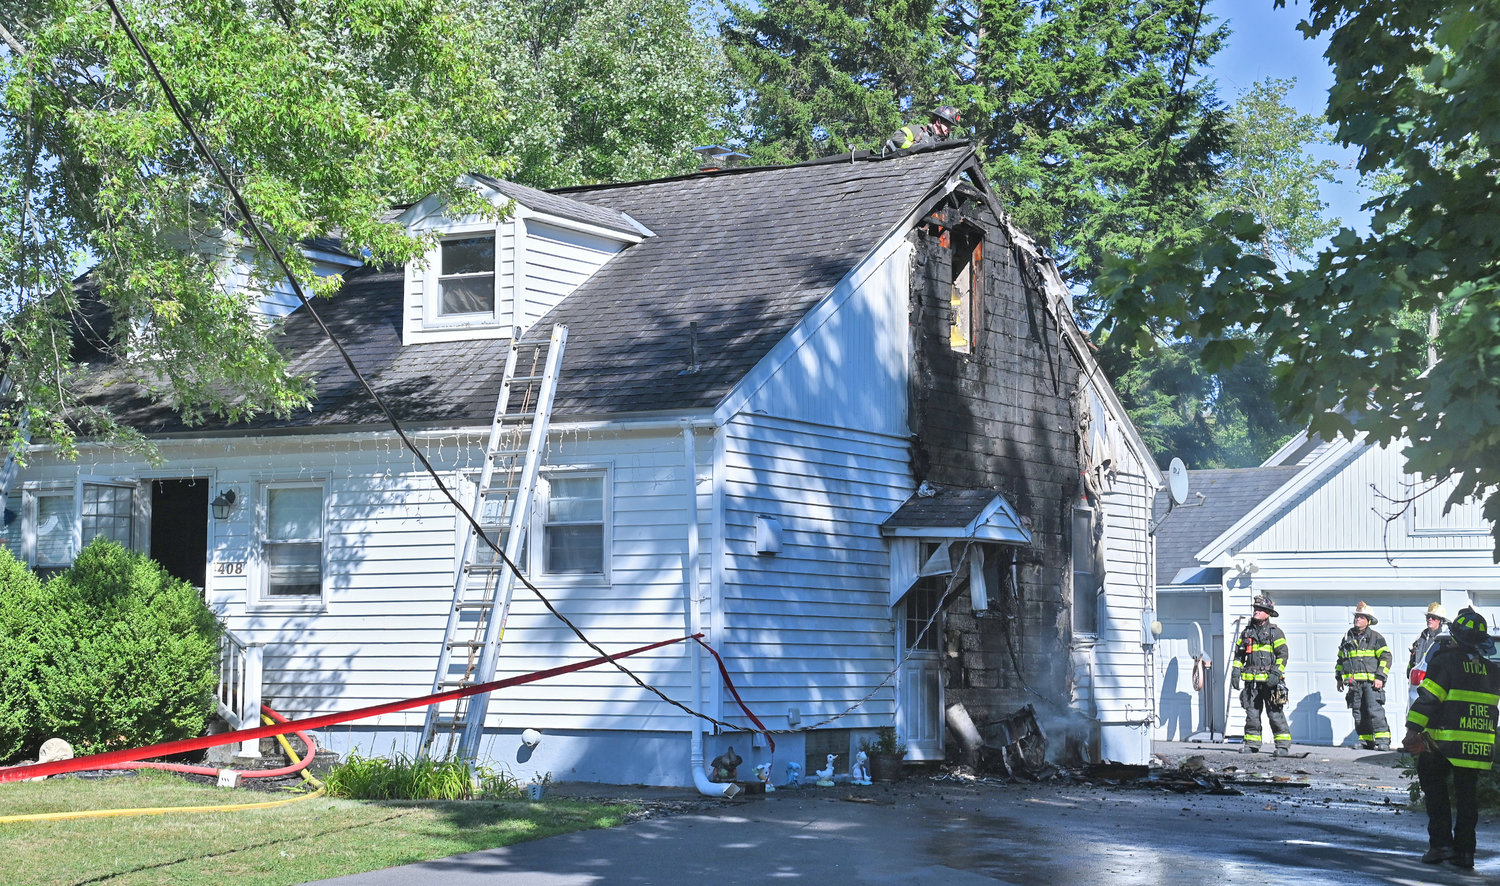 Utica firefighters survey the damage after an electrical issue on the outside of this home caused flames to burn up the side to the roof. A family of four have been displaced from their home on Buchanan Road on the city's north side, according to the Utica Fire Department.